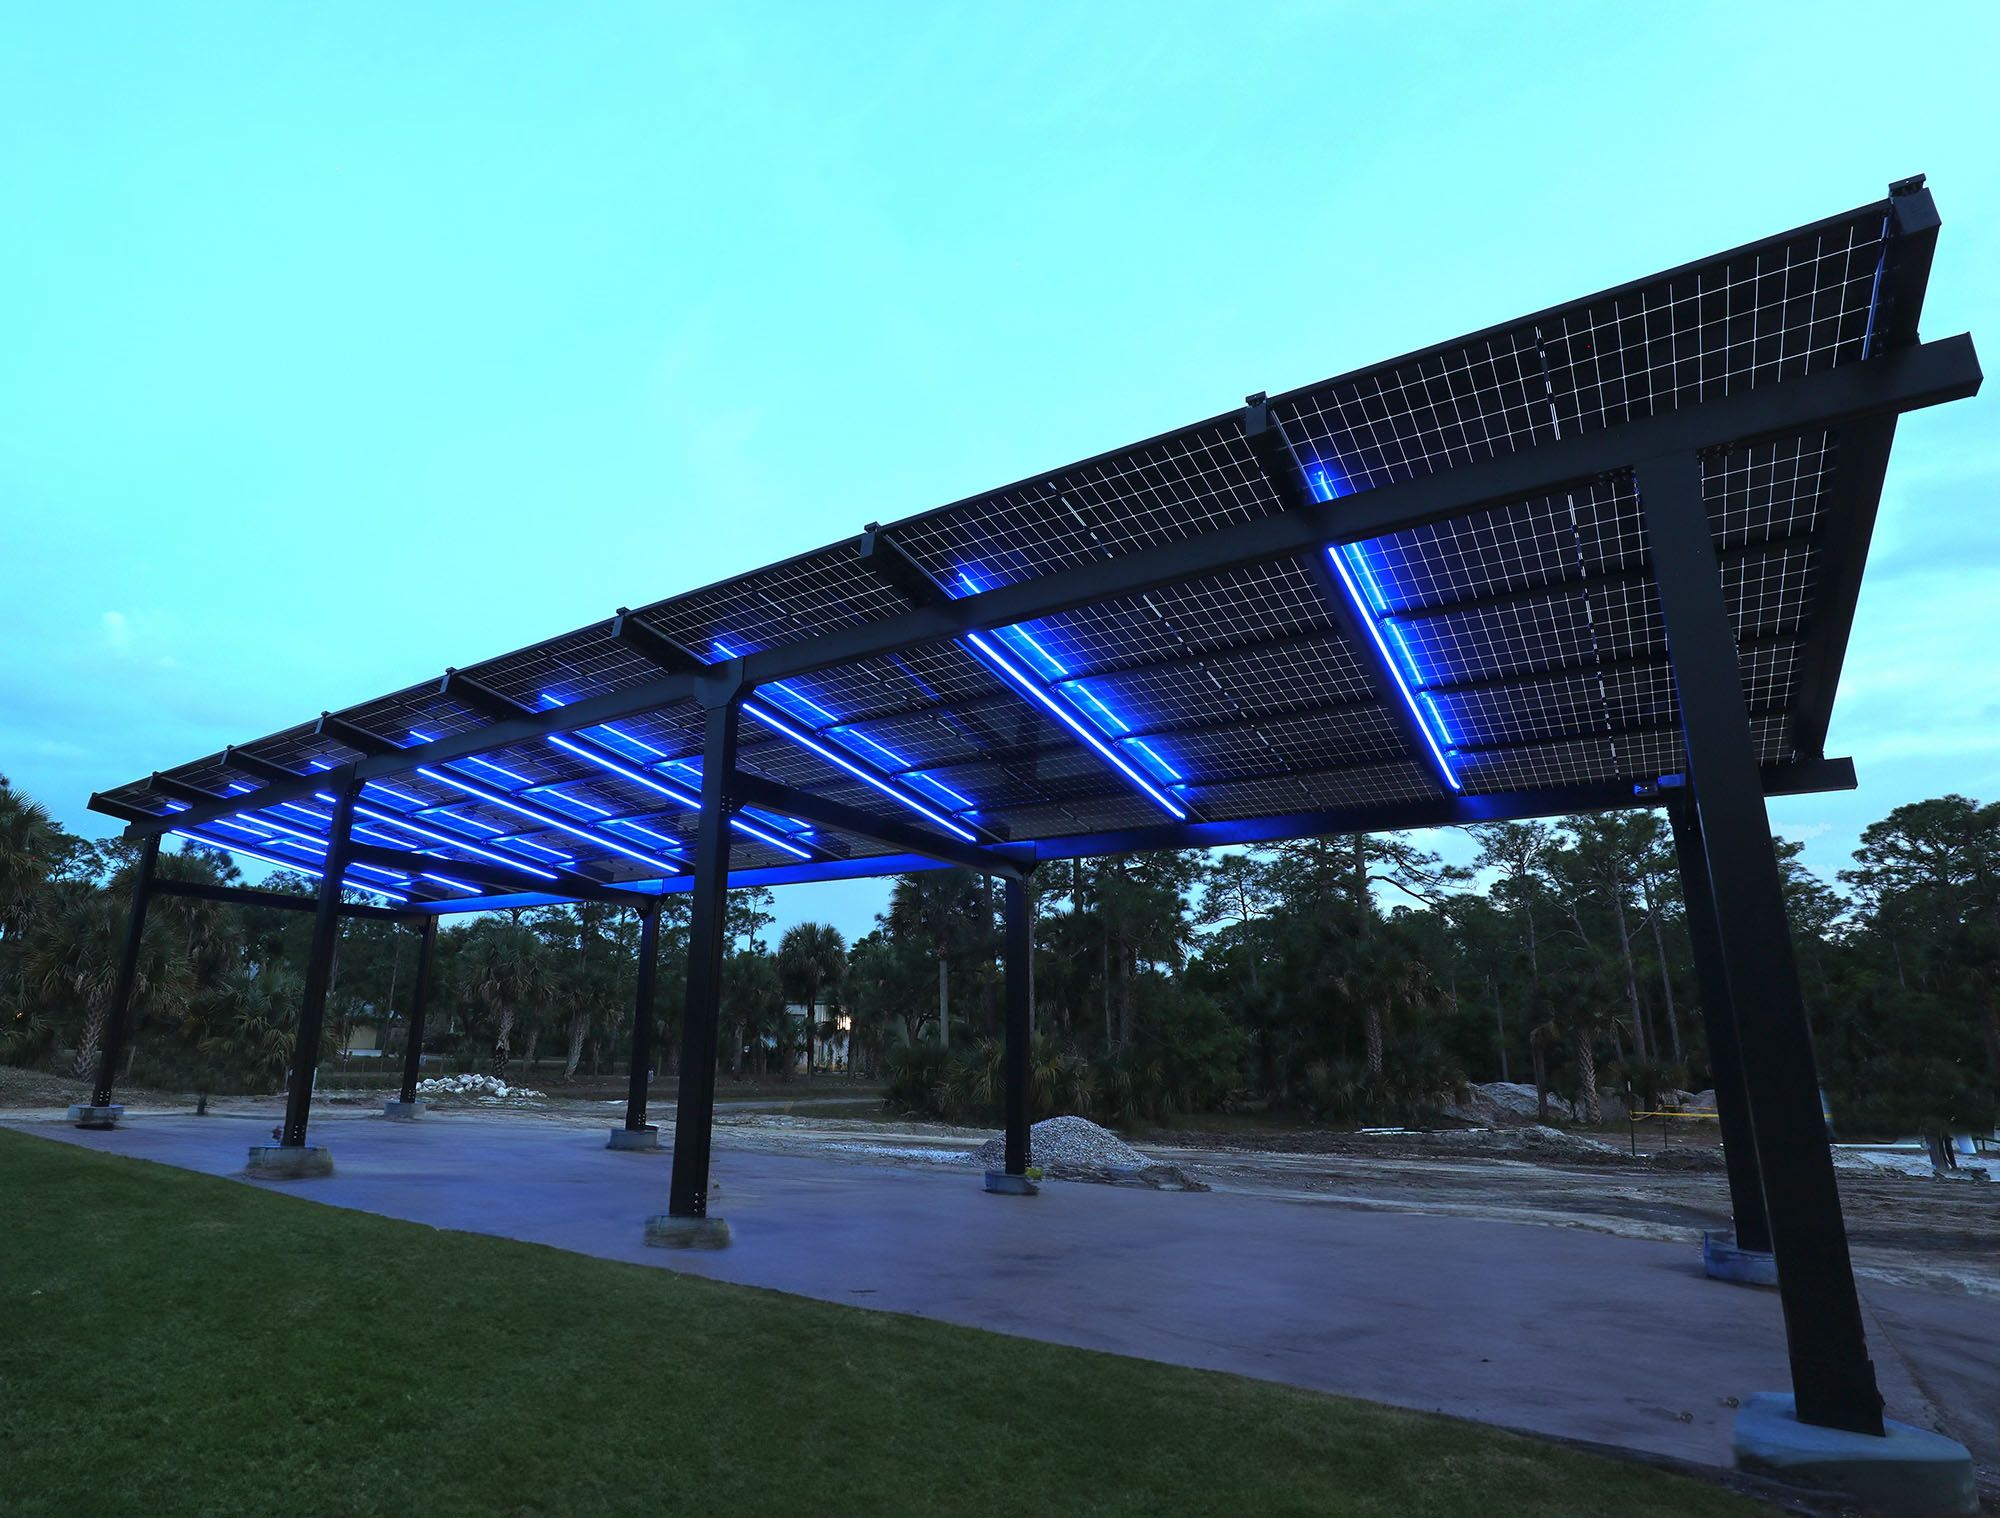 a solar panel covered area with blue lights